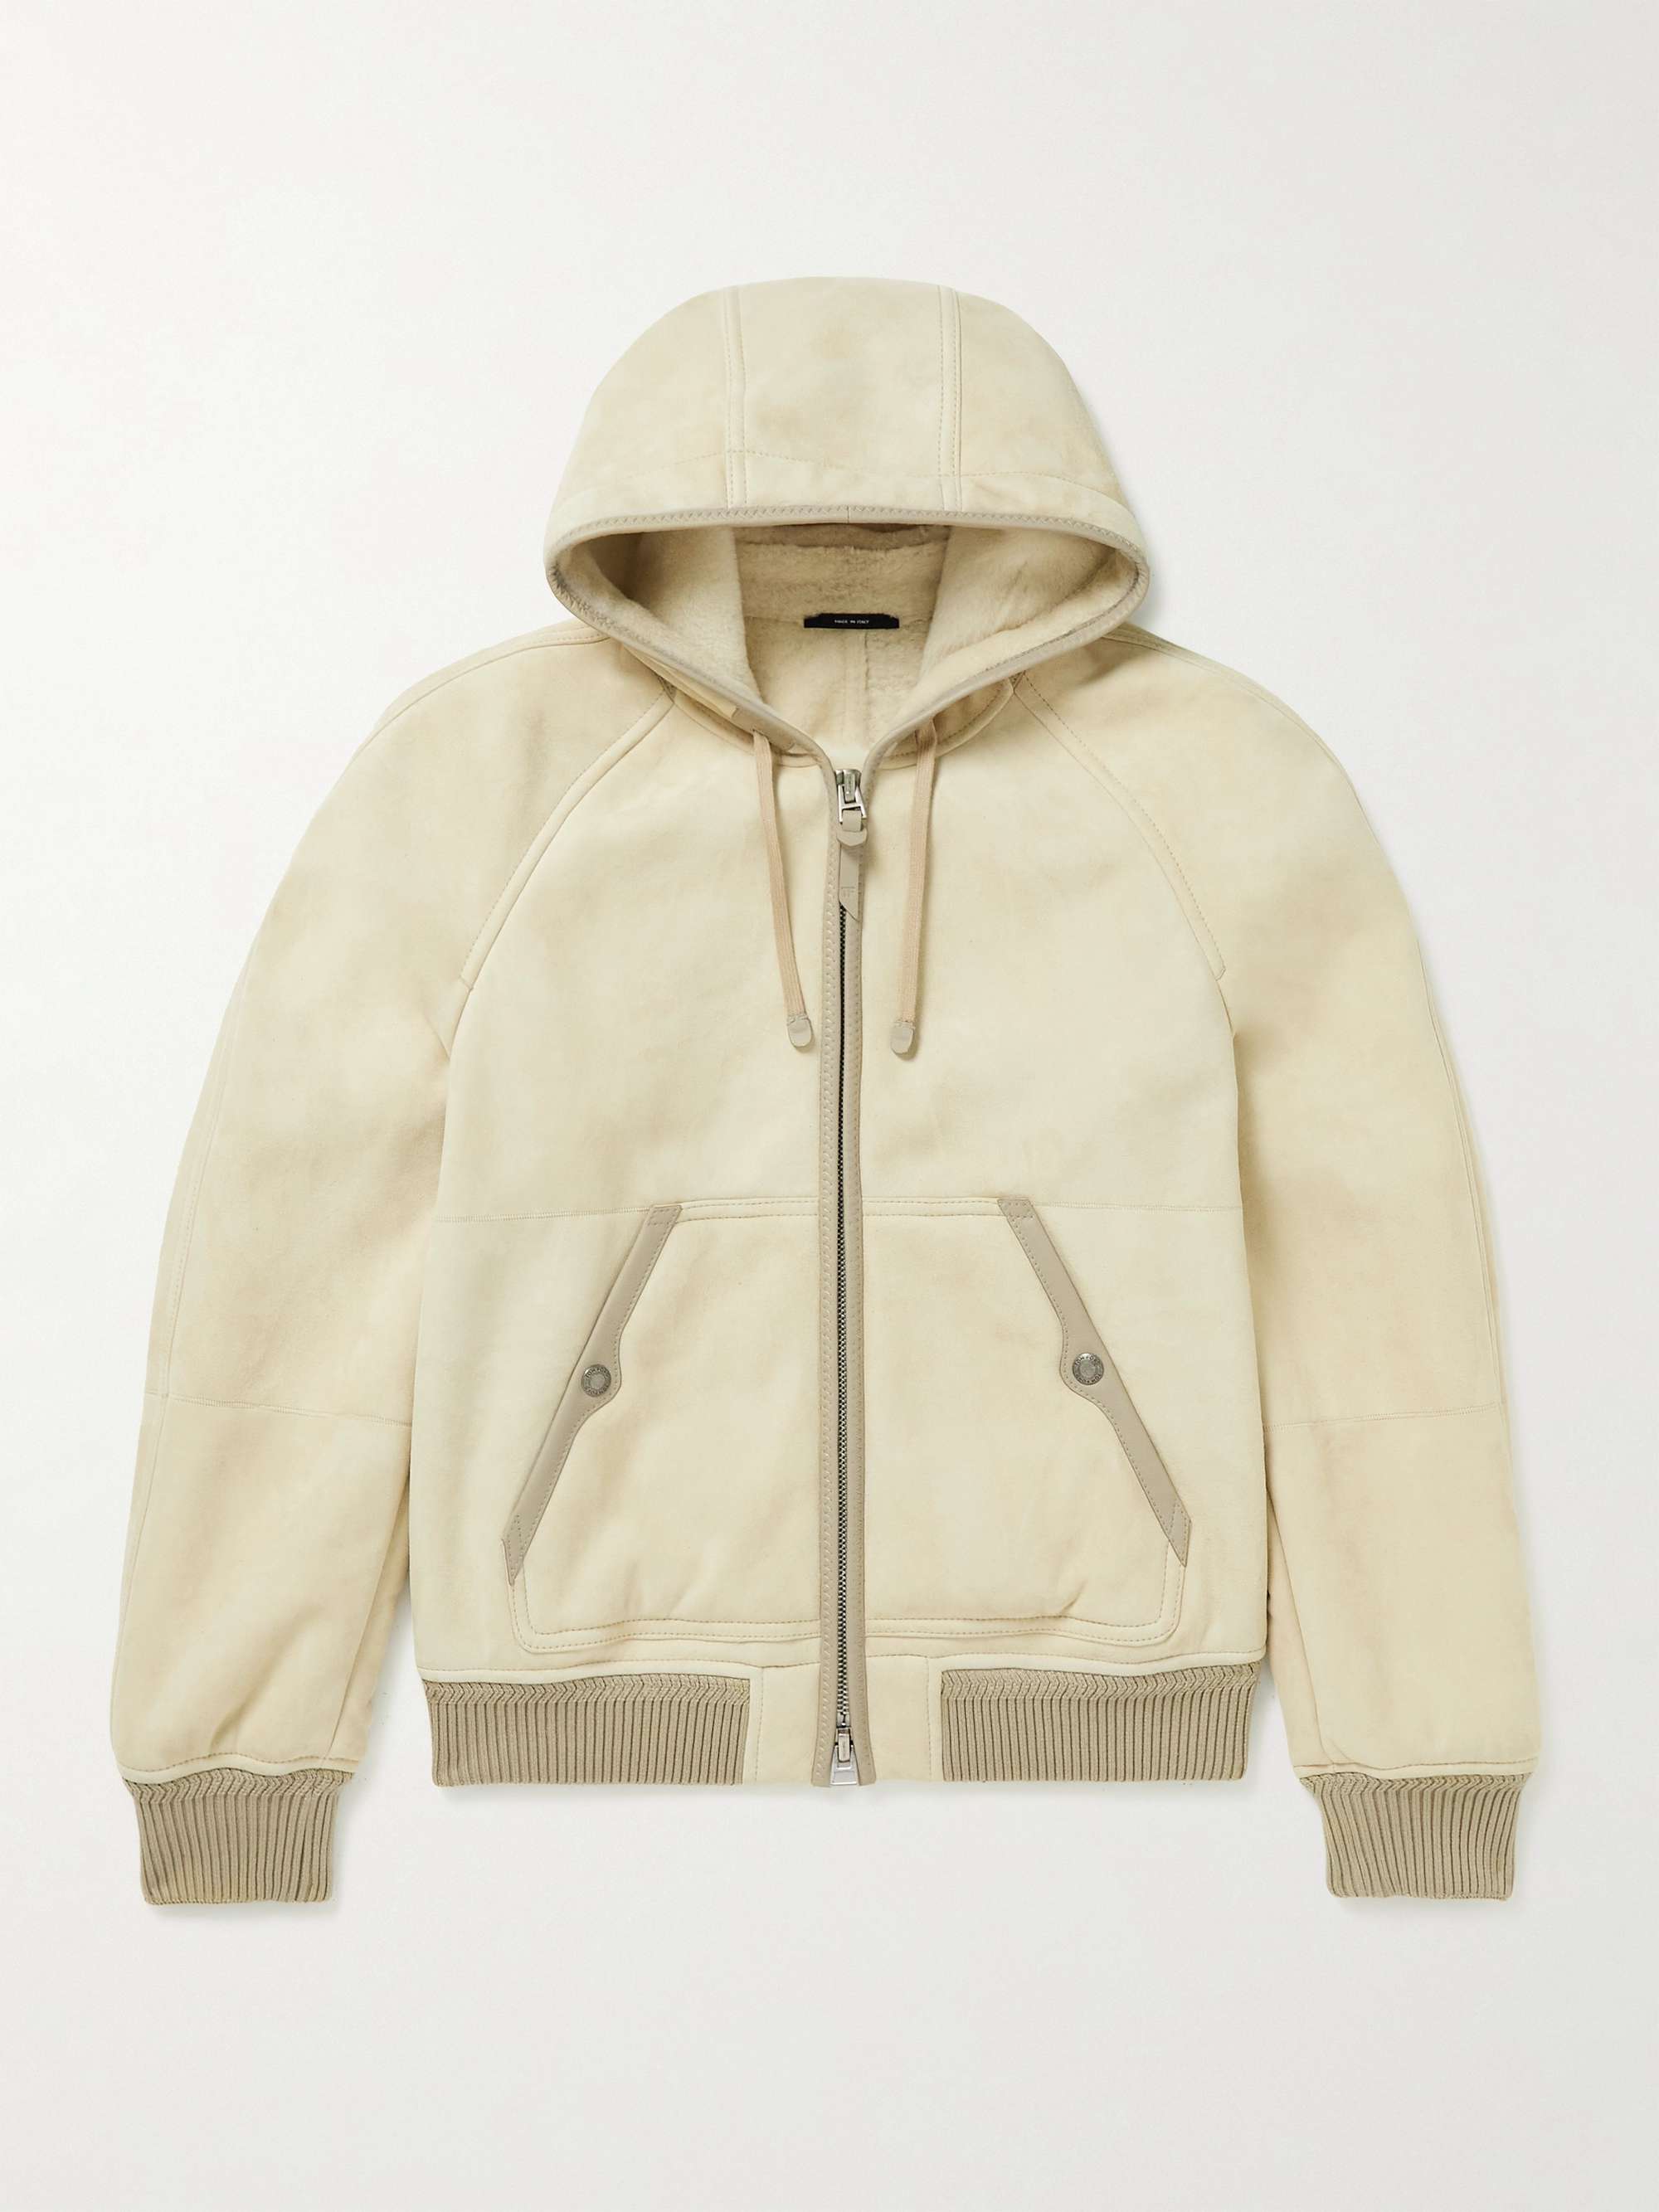 TOM FORD Leather-Trimmed Shearling Hooded Bomber Jacket